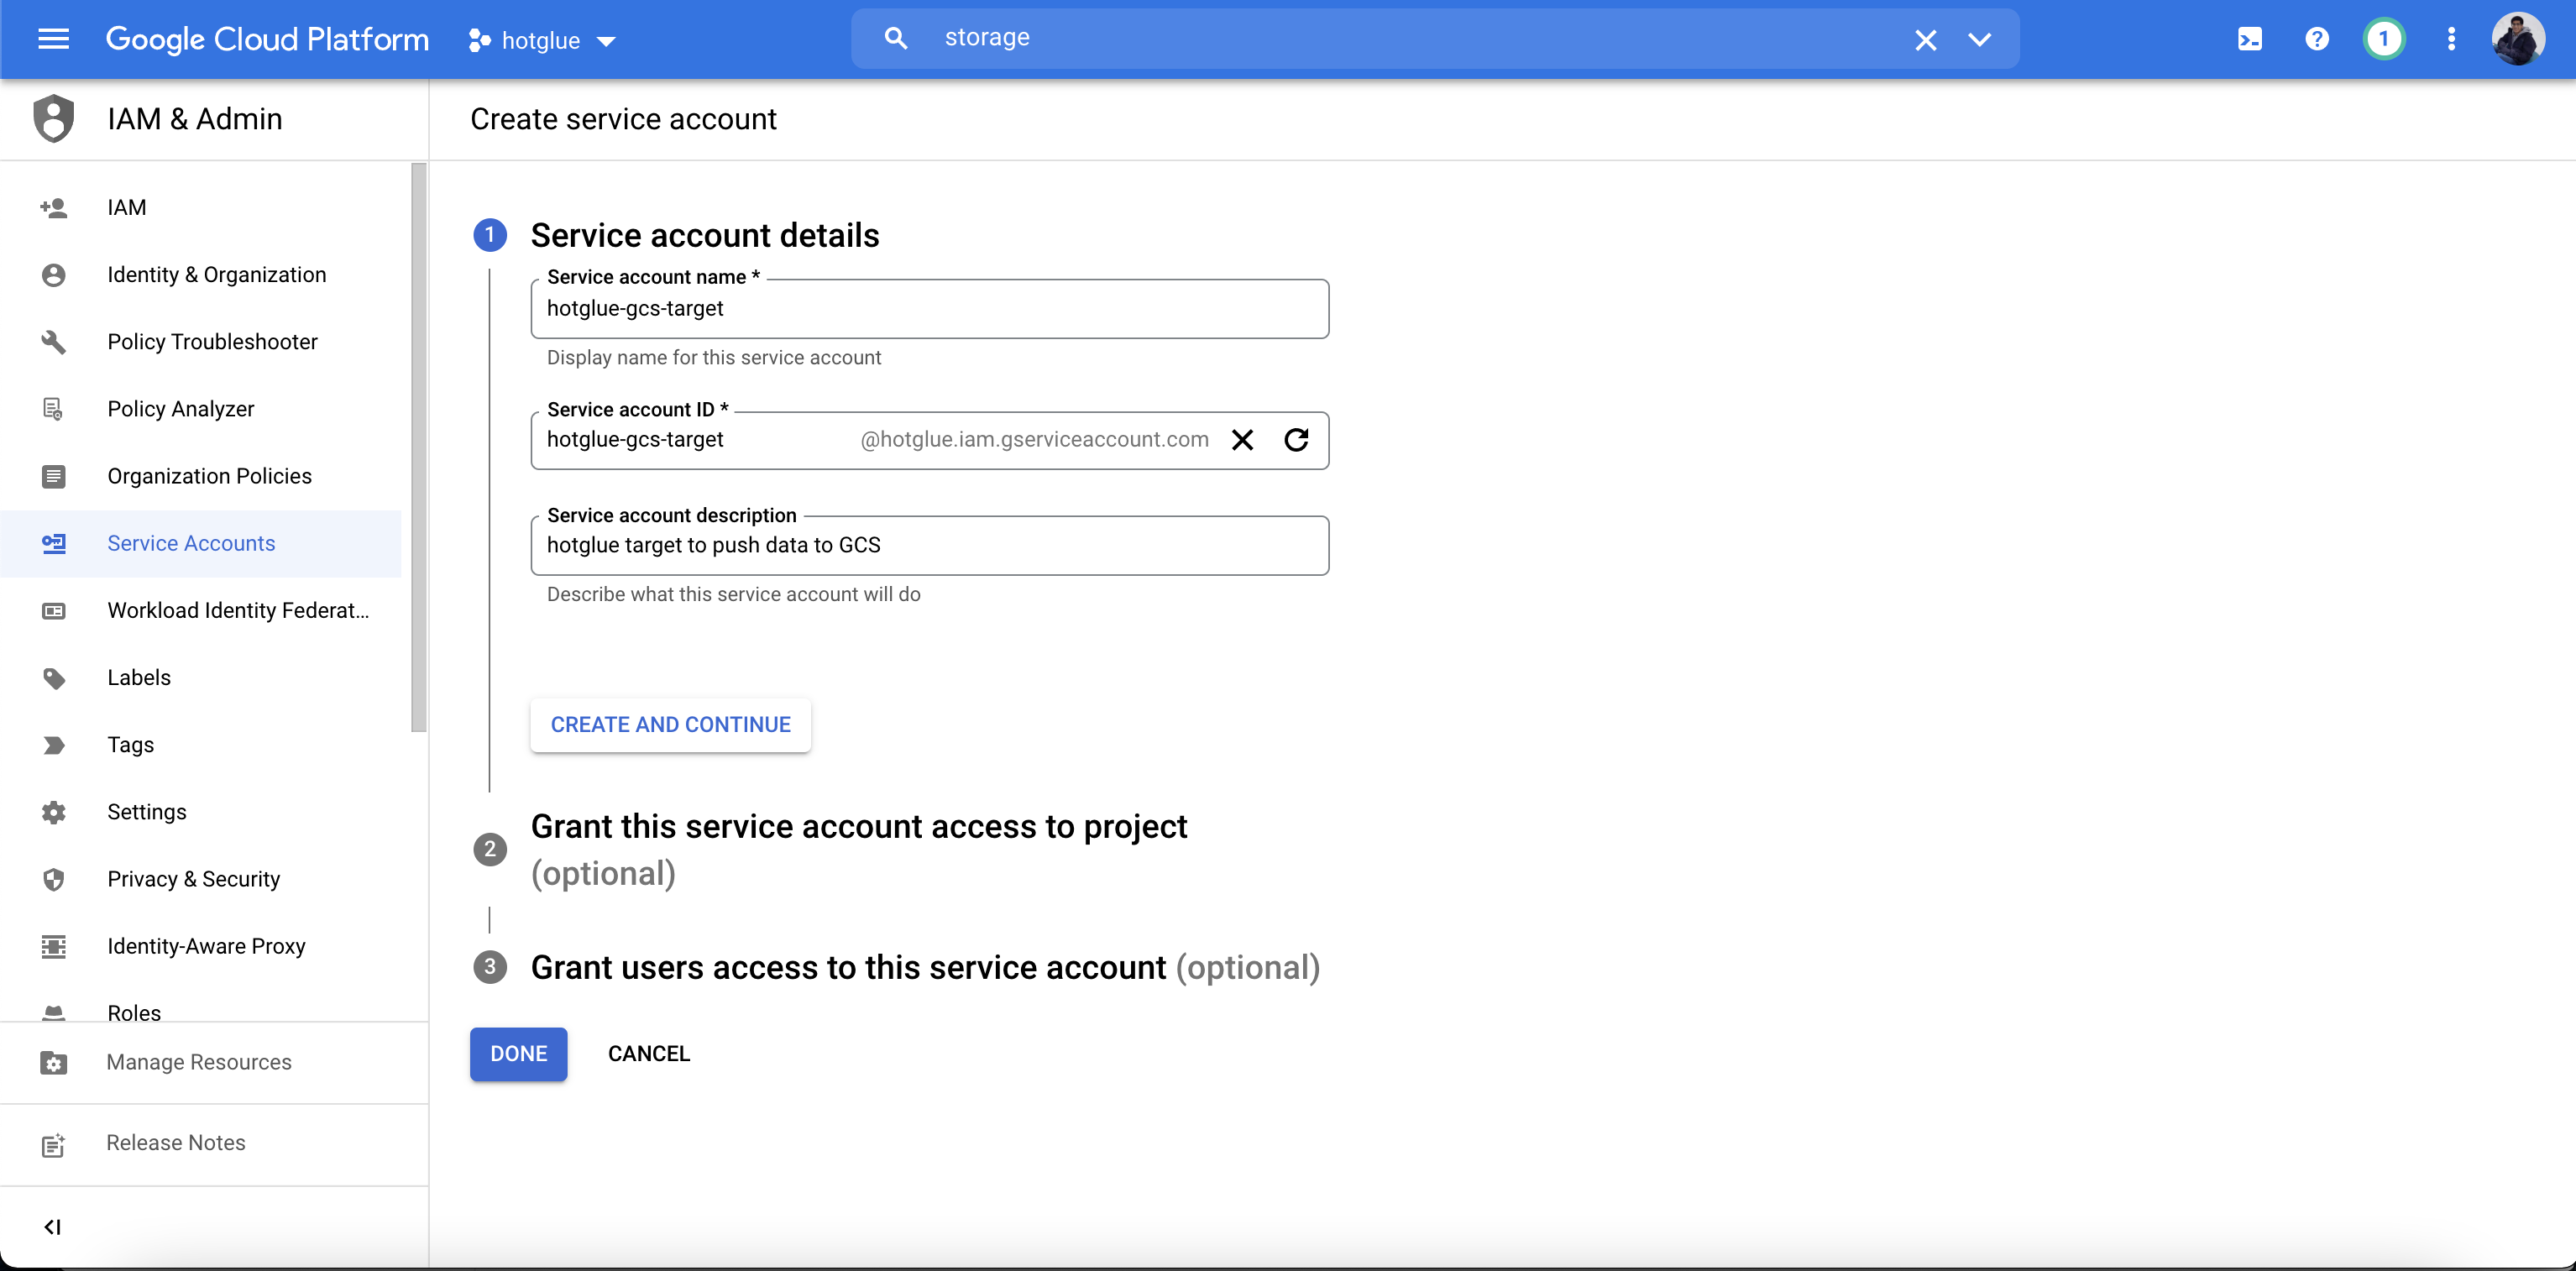 Fill service account details